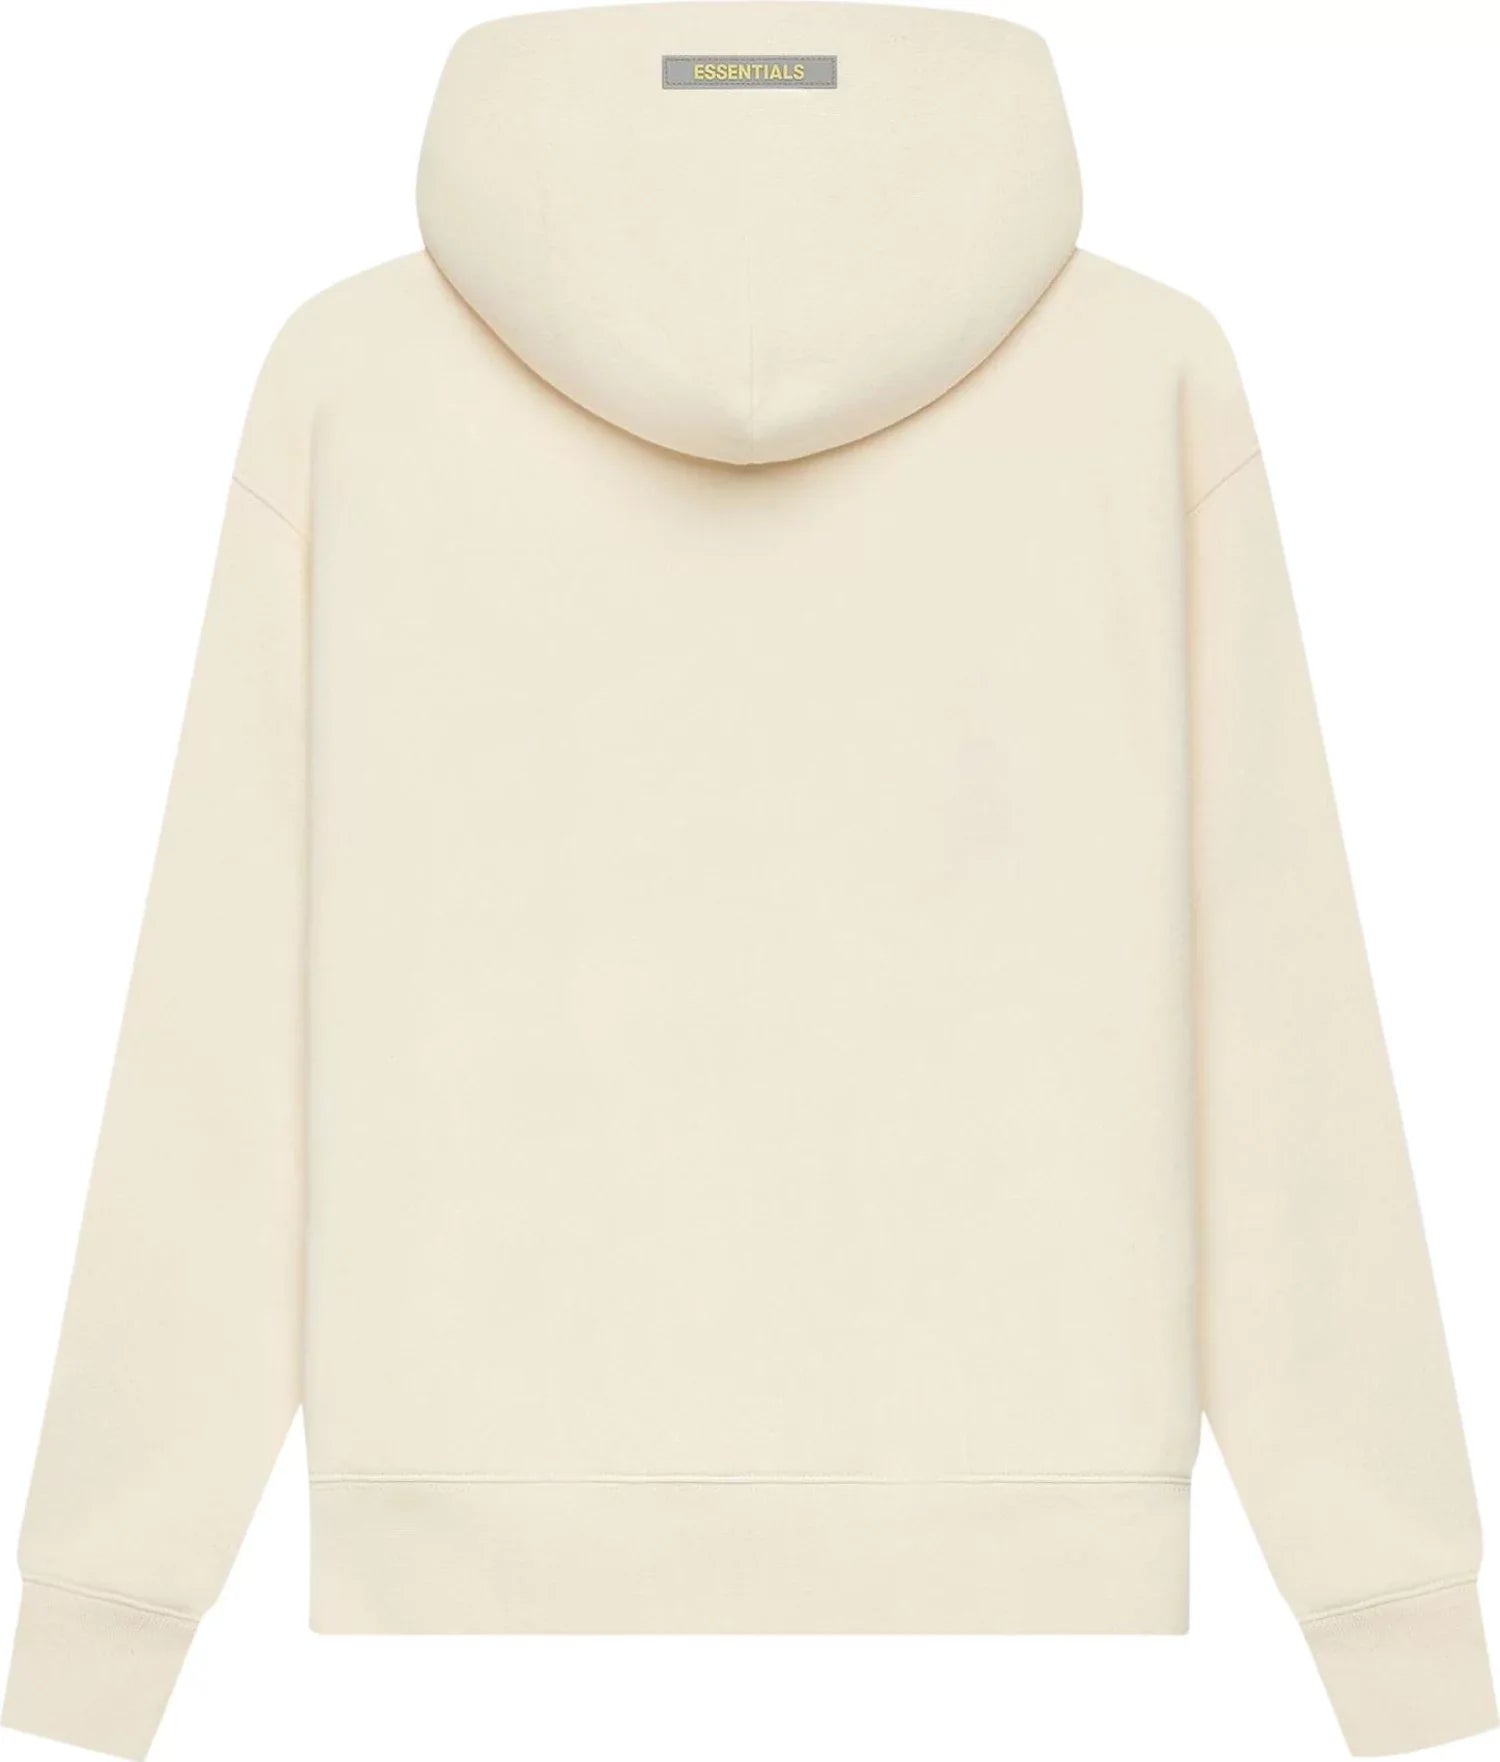 Fear of God Essentials Kids Pull-Over Hoodie 'Buttercream' Clothing Kickbox Sa